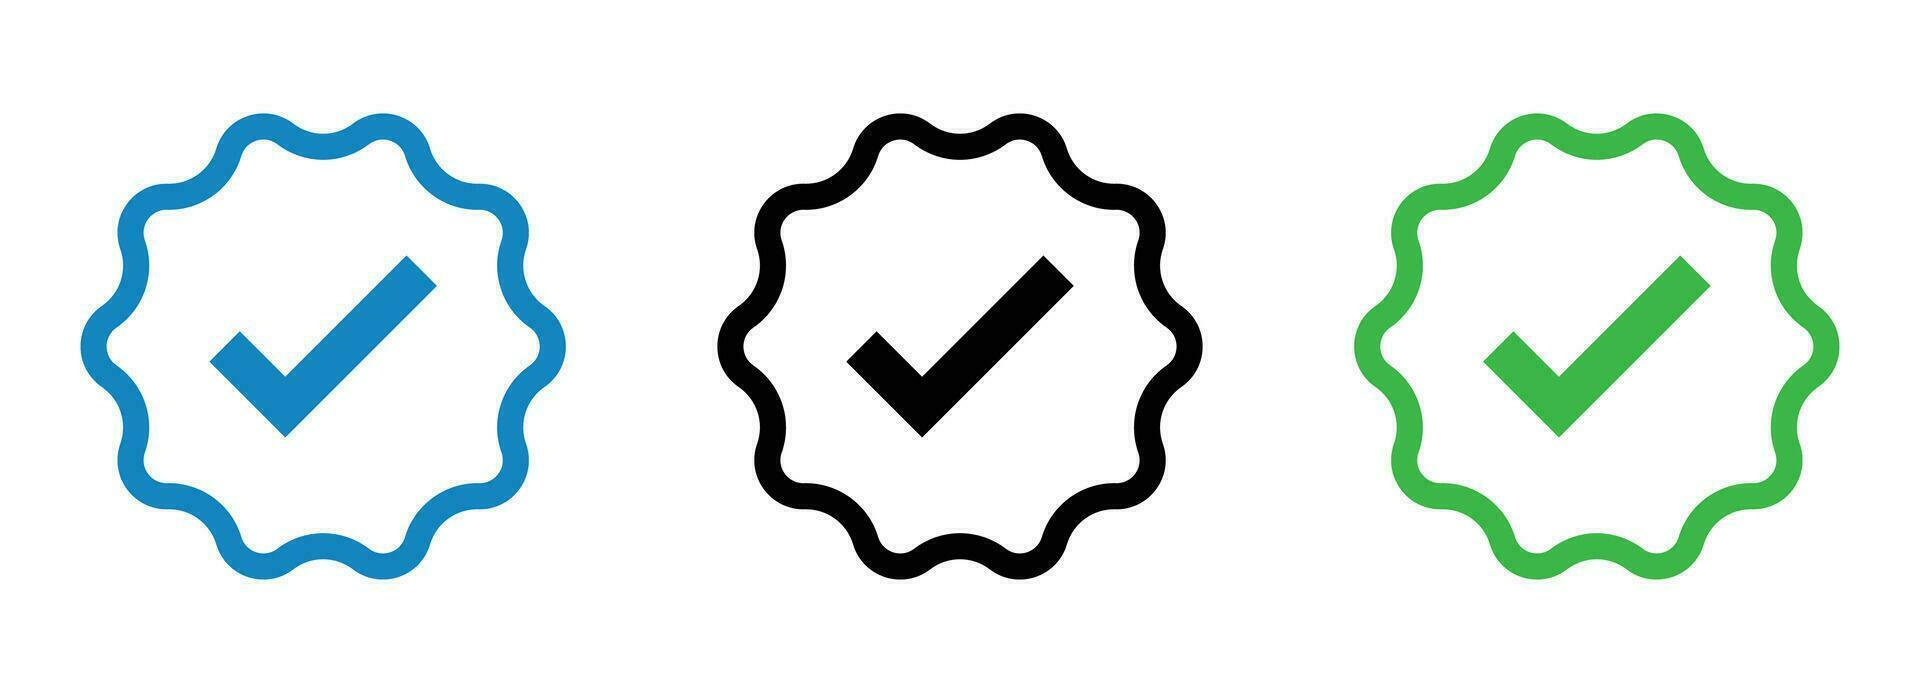 Verified Social Media Badge Icons Set - Symbols for Authenticity and Trust vector